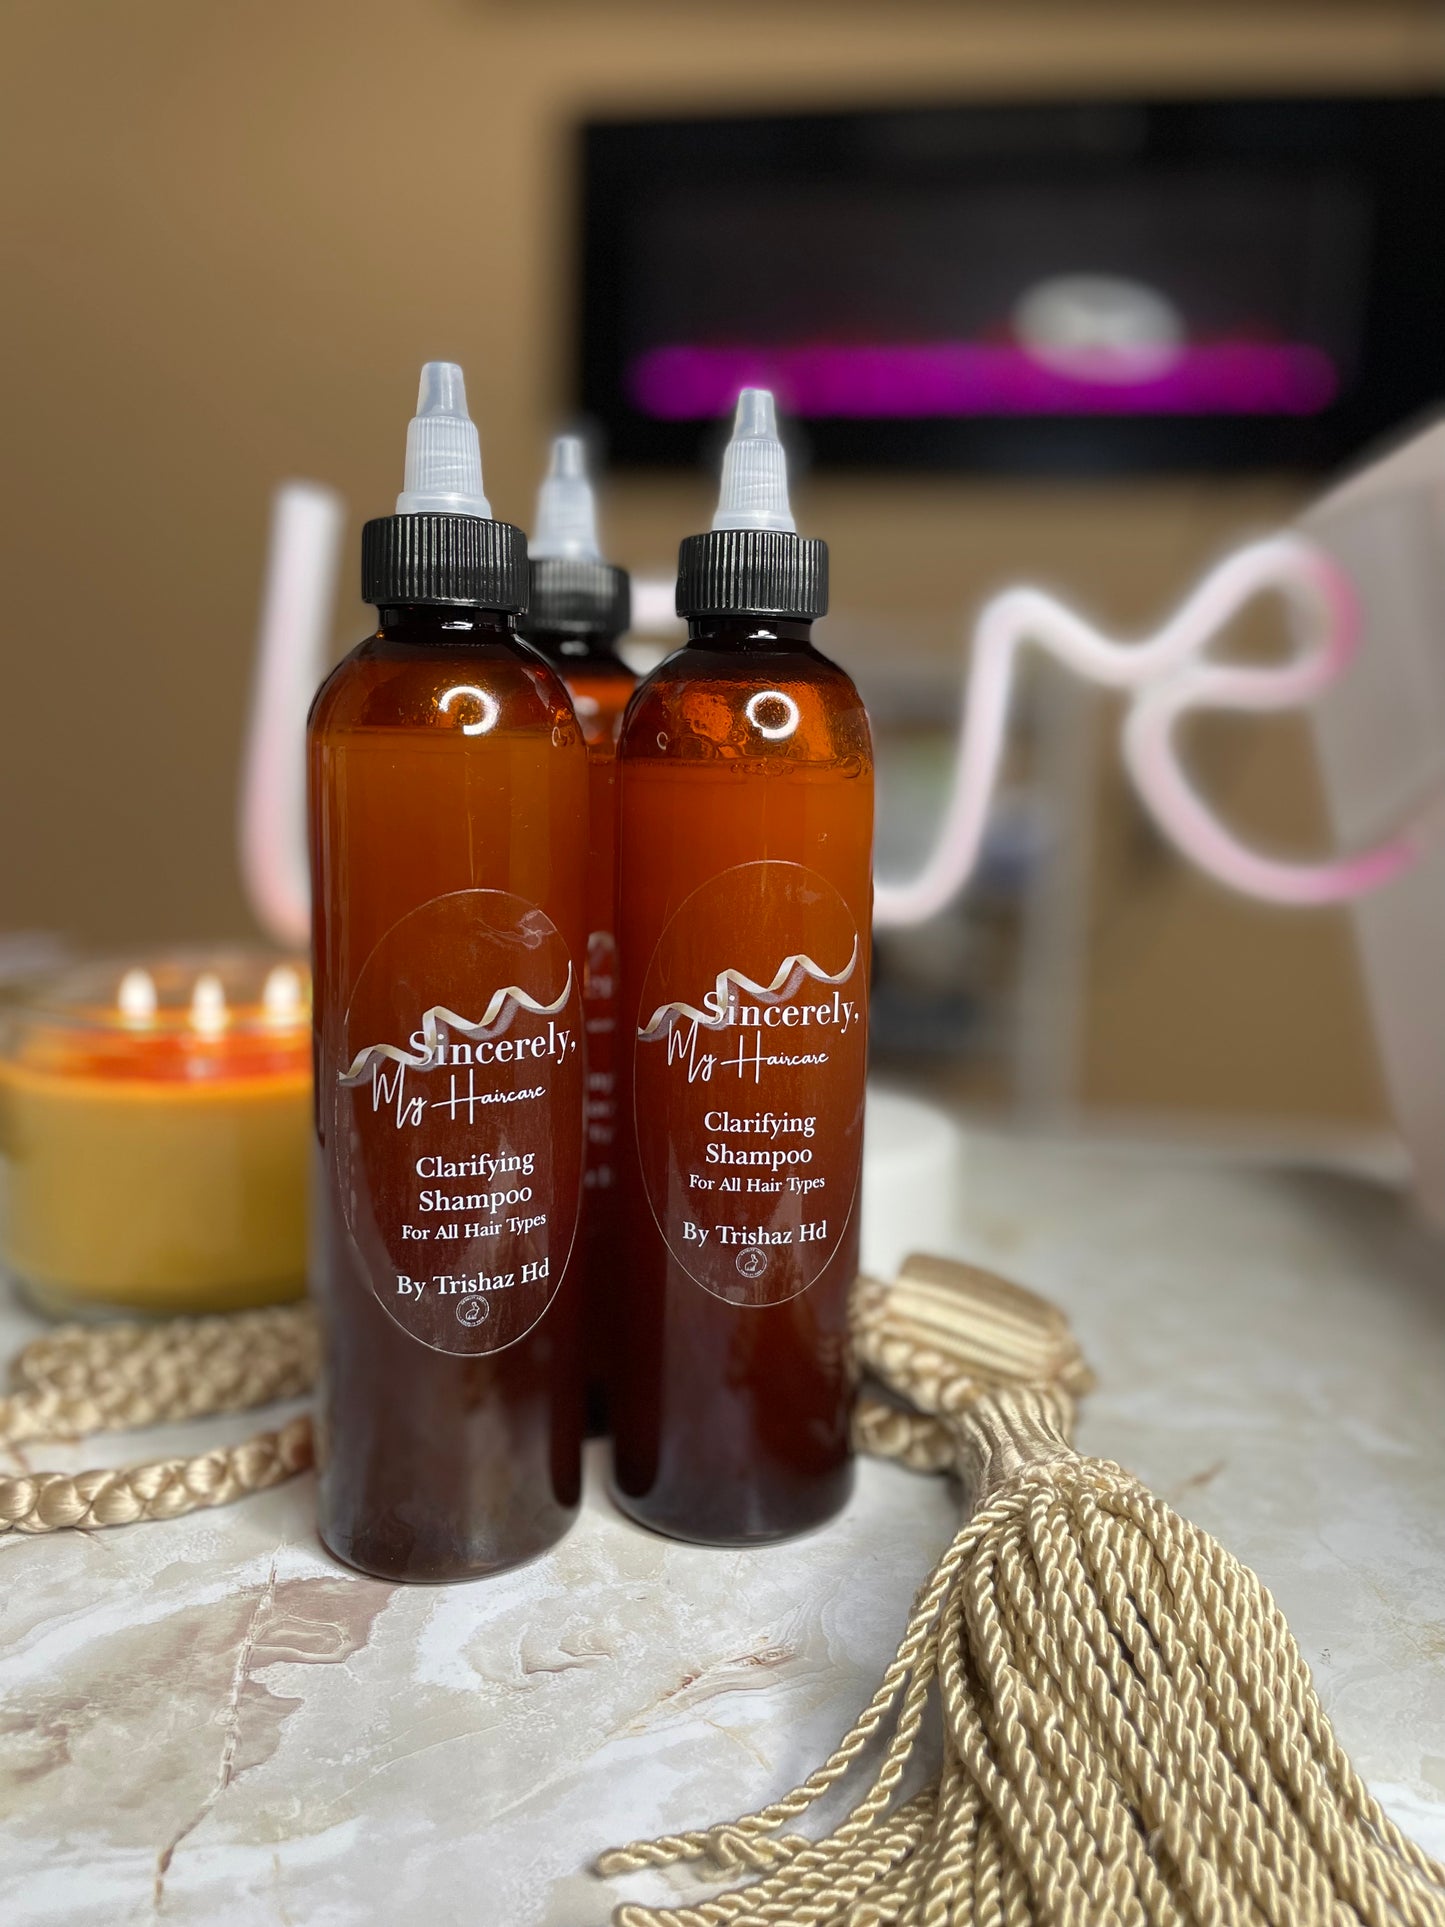 Sincerely MyHaircare Clarifying Shampoo